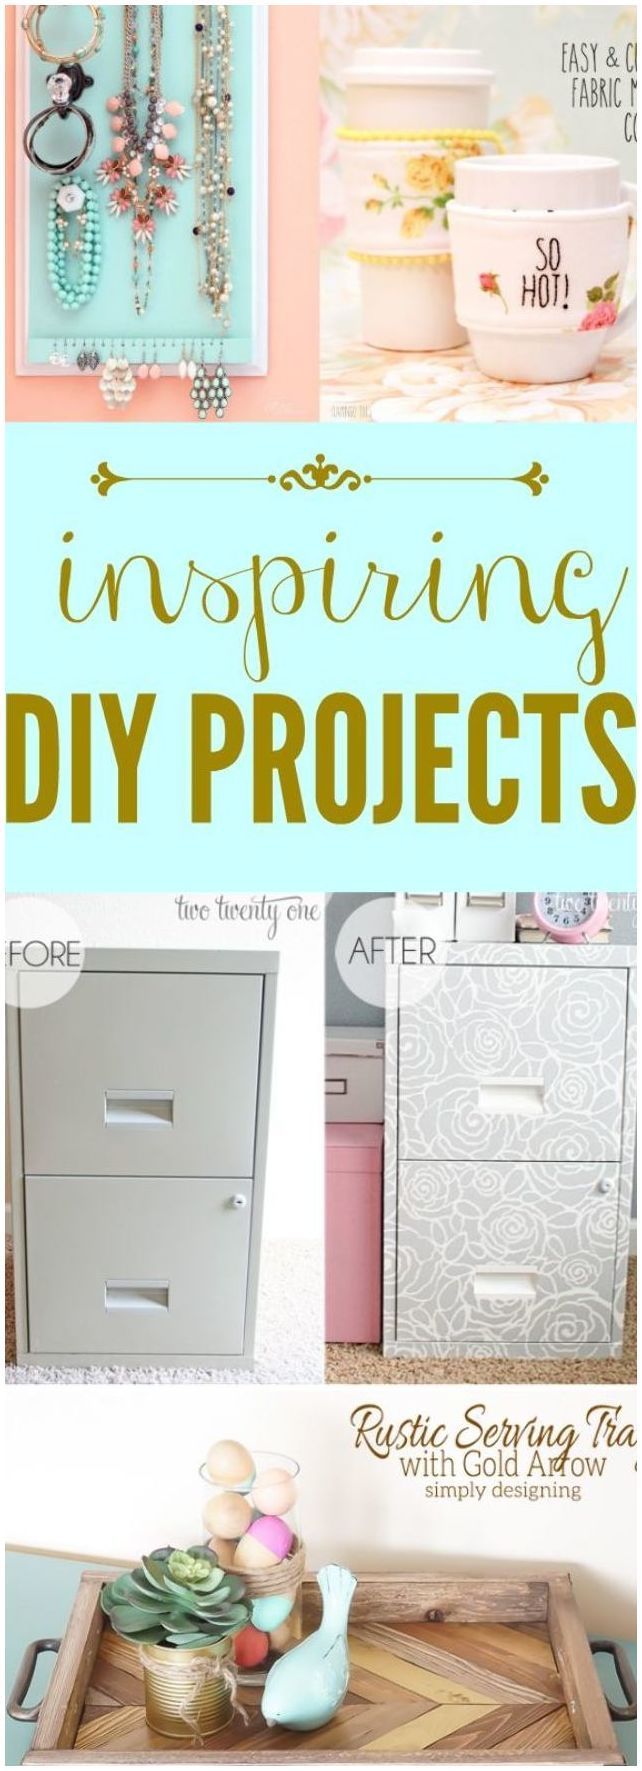 Inspiring DIY Projects to get your creative juices flowing in the new year!… - Inspiring DIY Projects to get your creative juices flowing in the new year!… -   18 diy 100 inspiration ideas